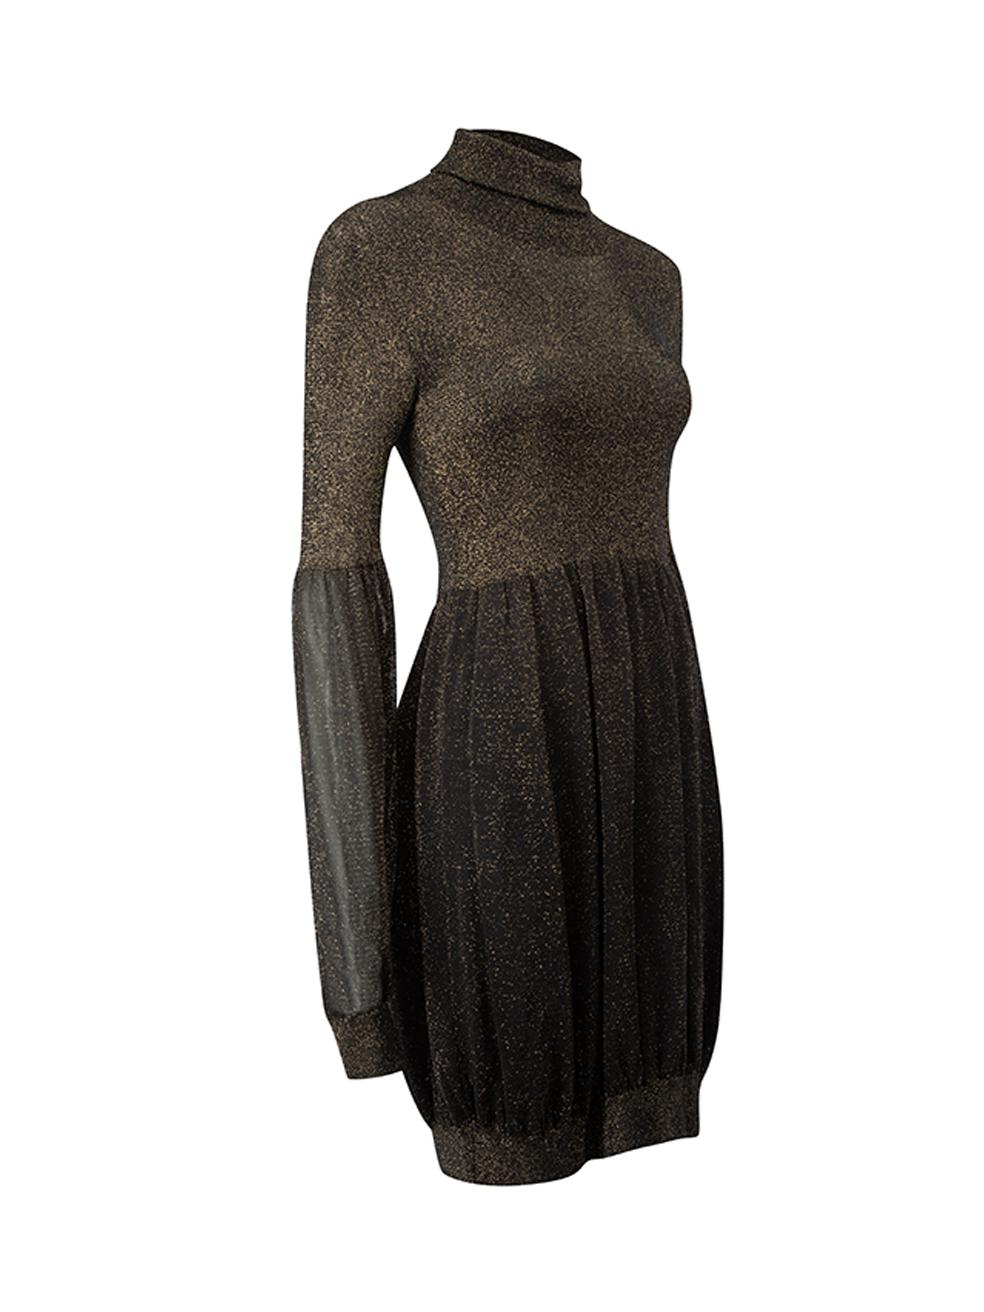 CONDITION is Very good. Hardly any visible wear to dress is evident on this used Gucci designer resale item.



Details


Metallic black

Viscose

Sweater dress

Mini length

Turtleneck

Stretchy





Made in Italy



Composition

80% Viscose and